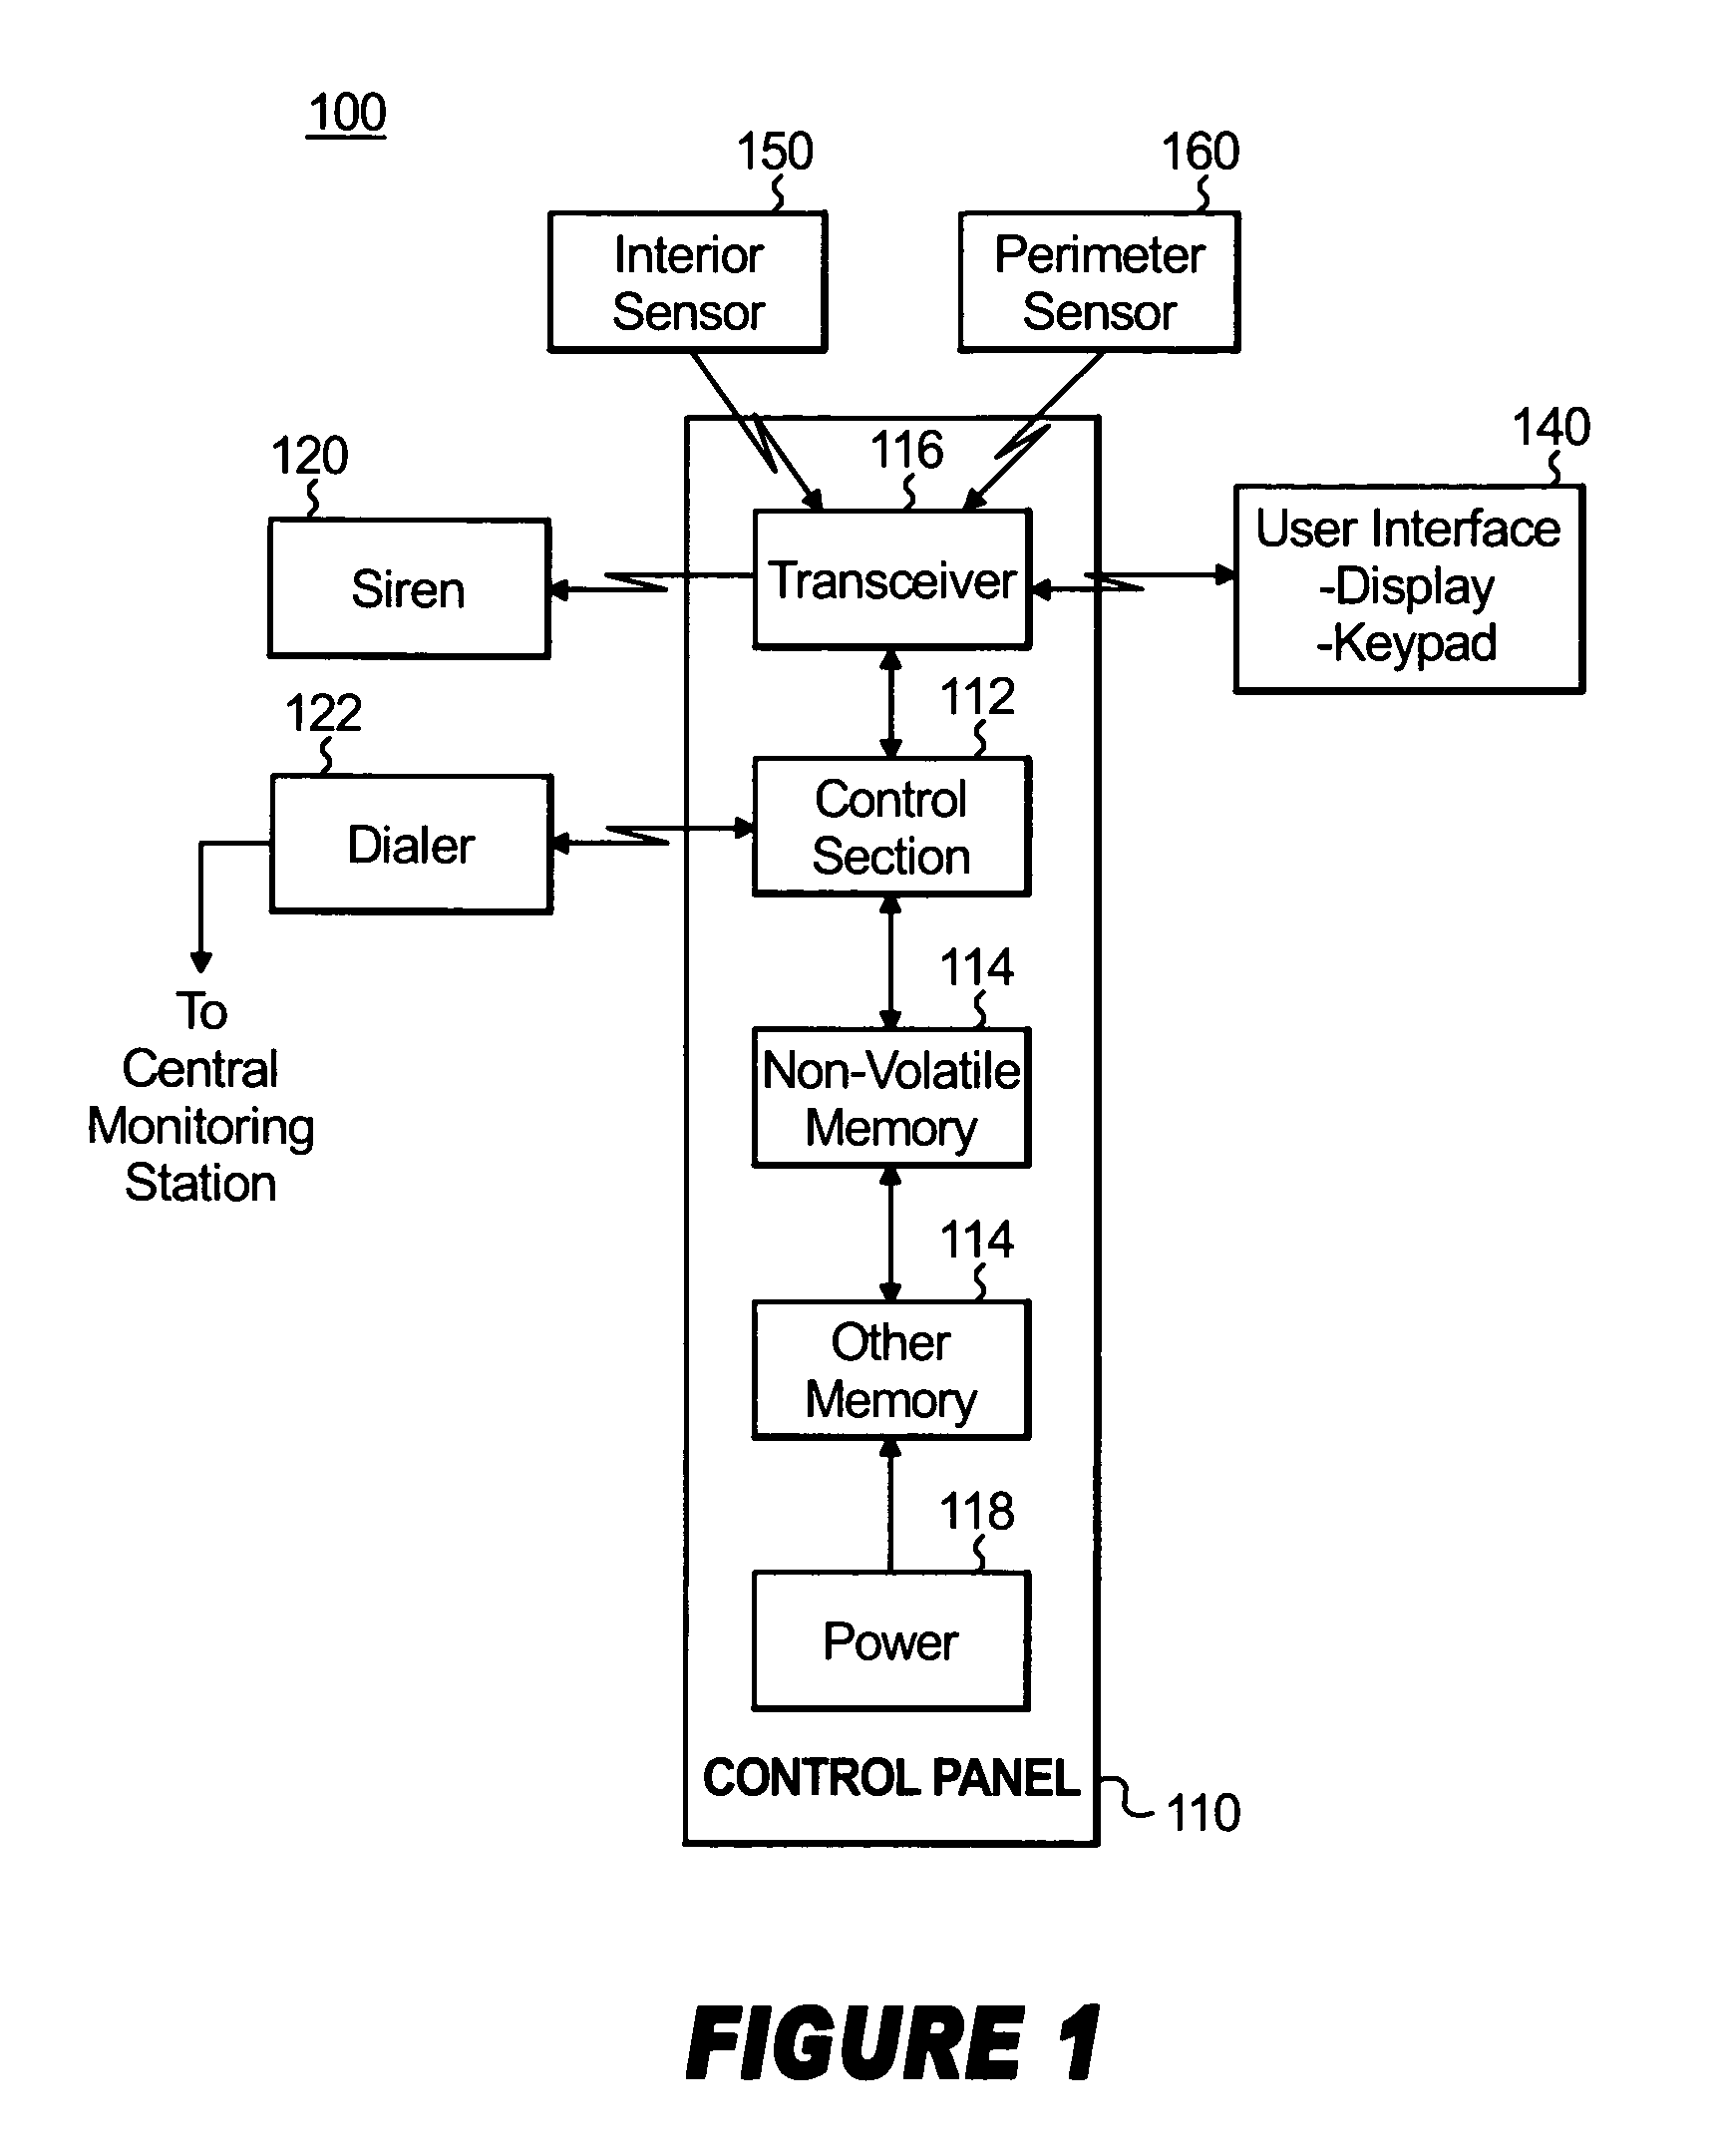 Method of reducing false alarms during auto-arm